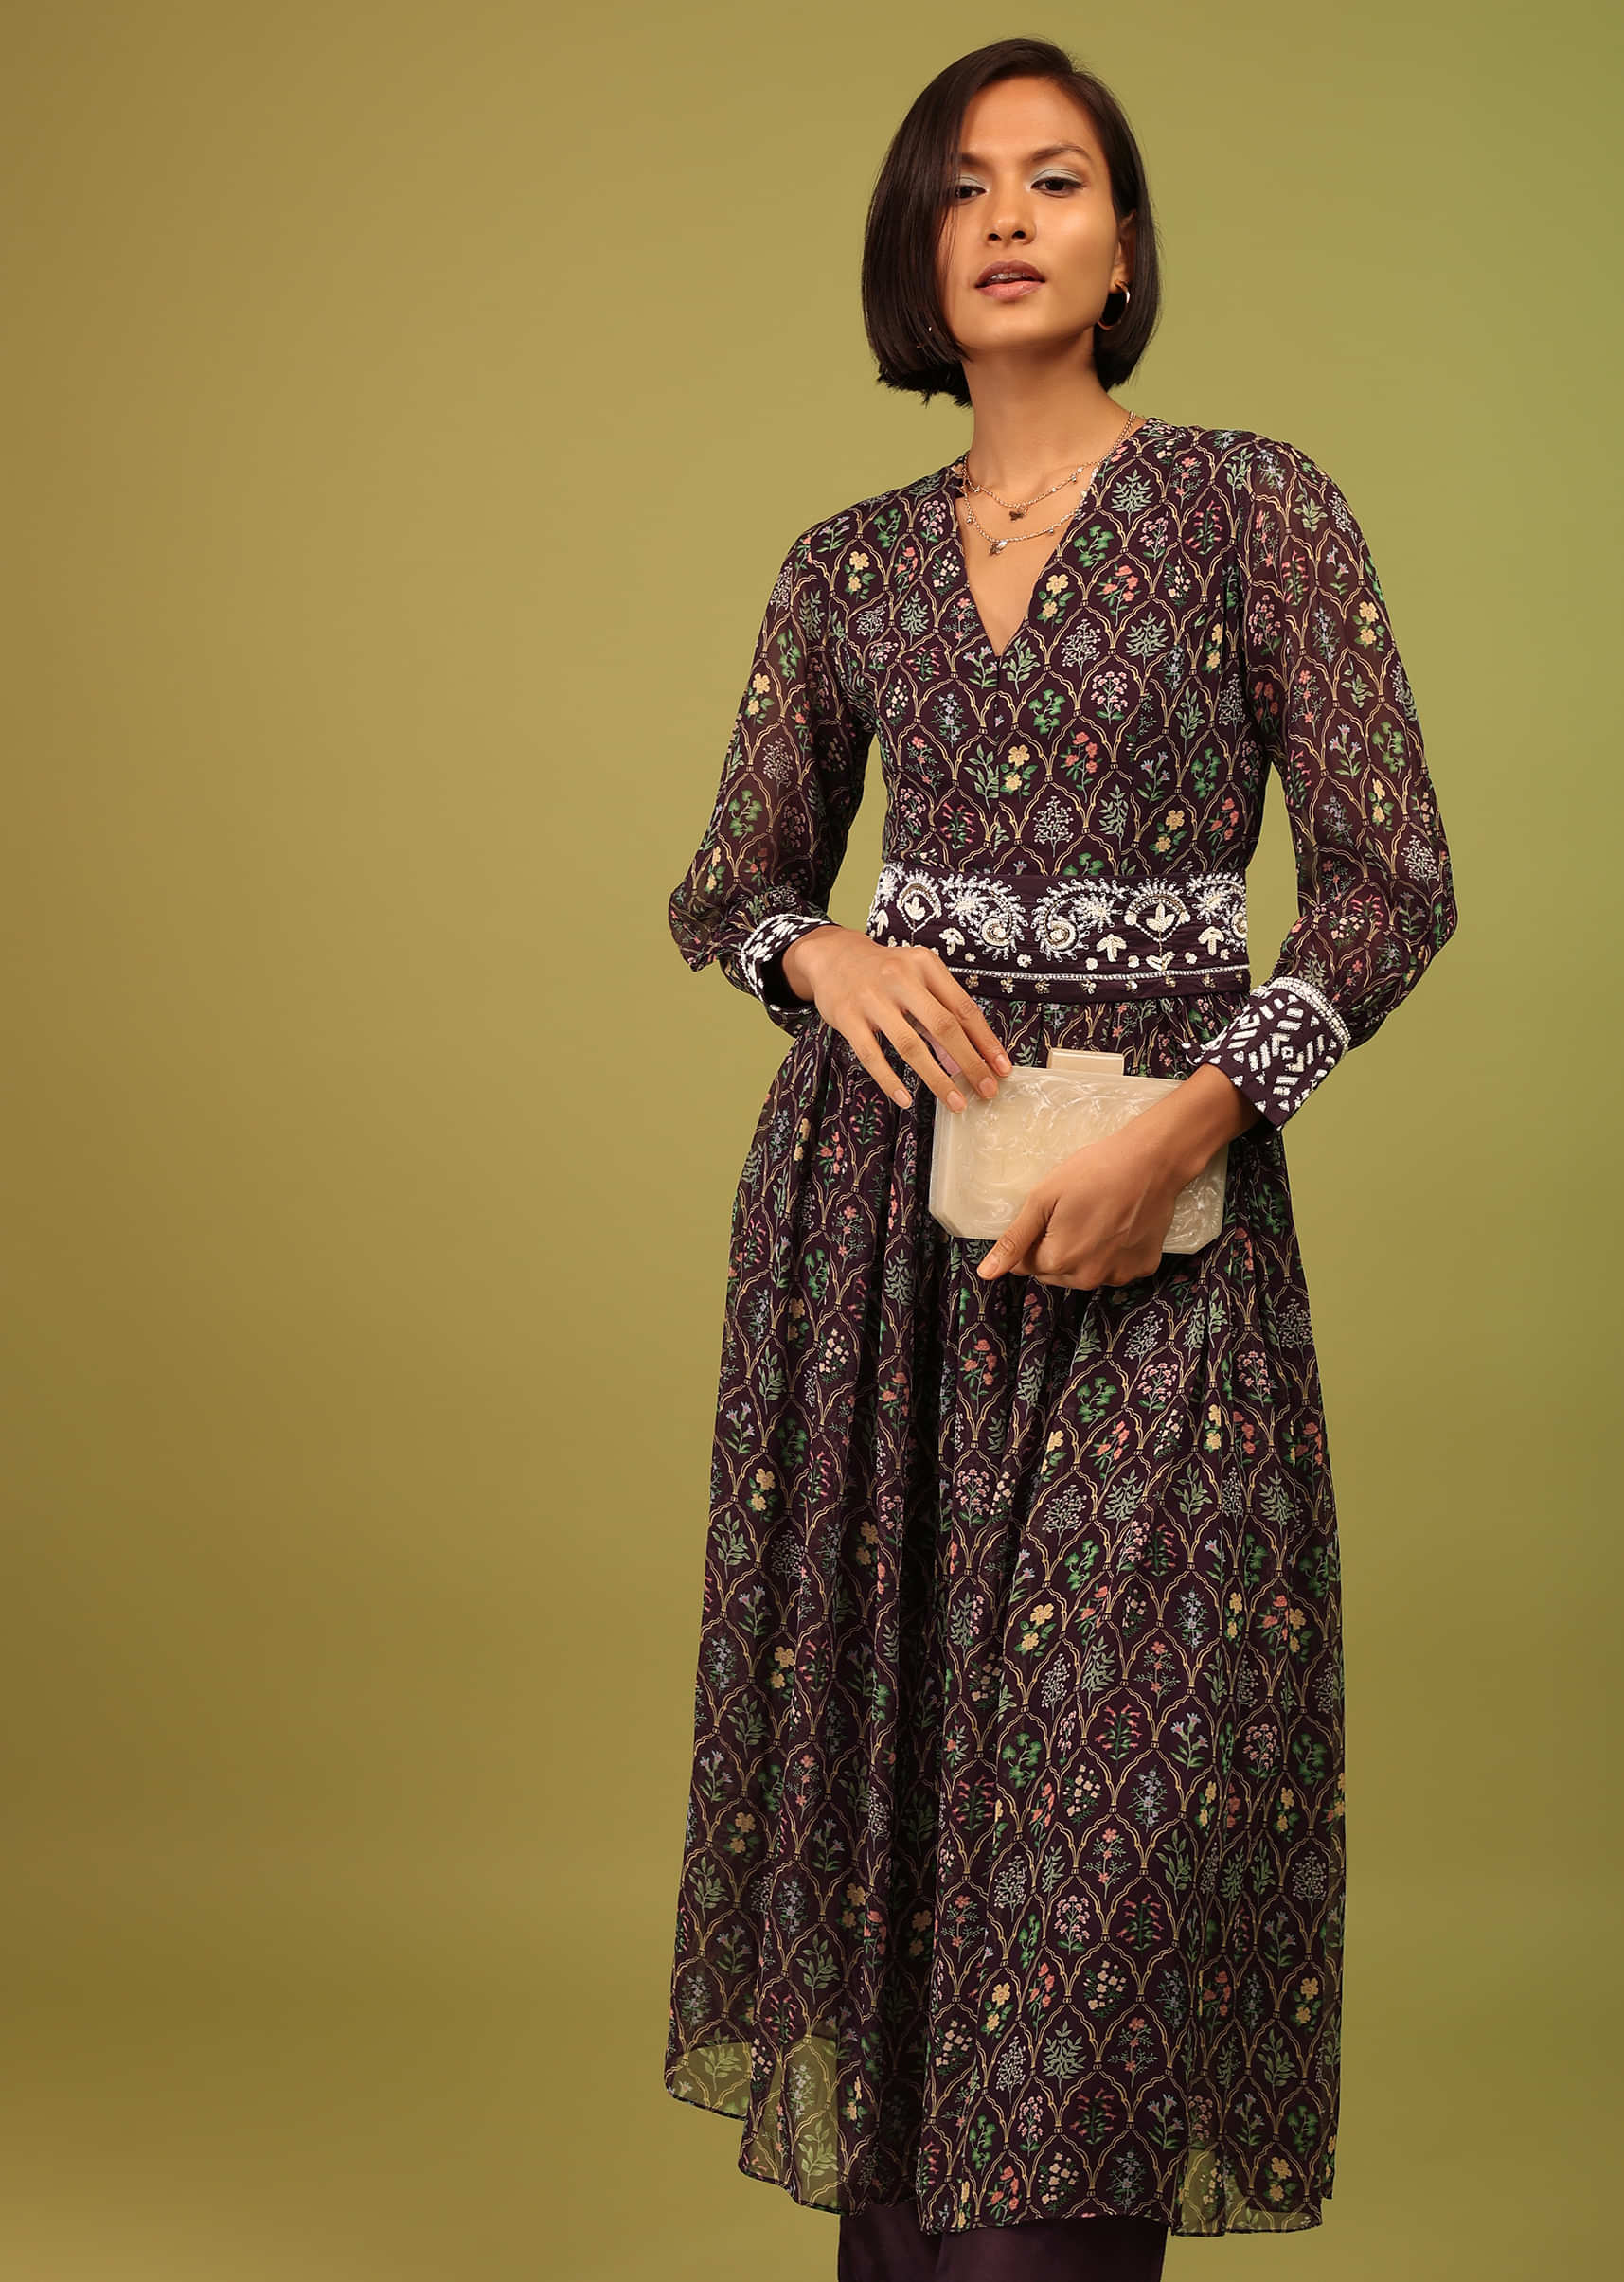 Dusty Brown Pant Suit In Georgette With Multicolor Floral Print & Embroidery